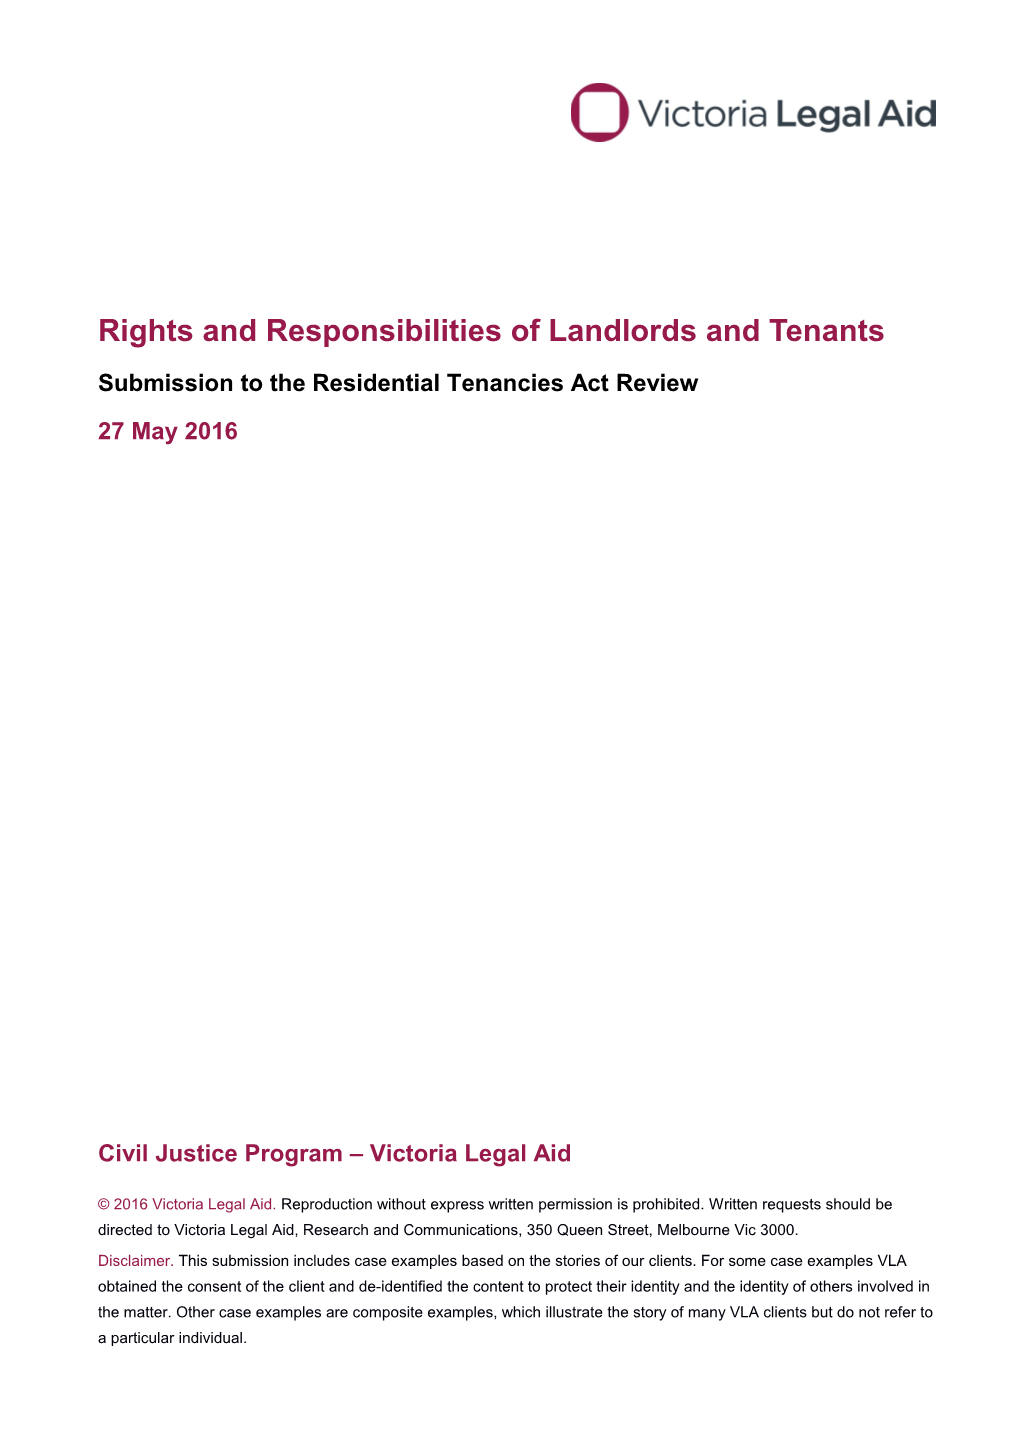 Residential Tenancies Act Review Security of Tenure Submission